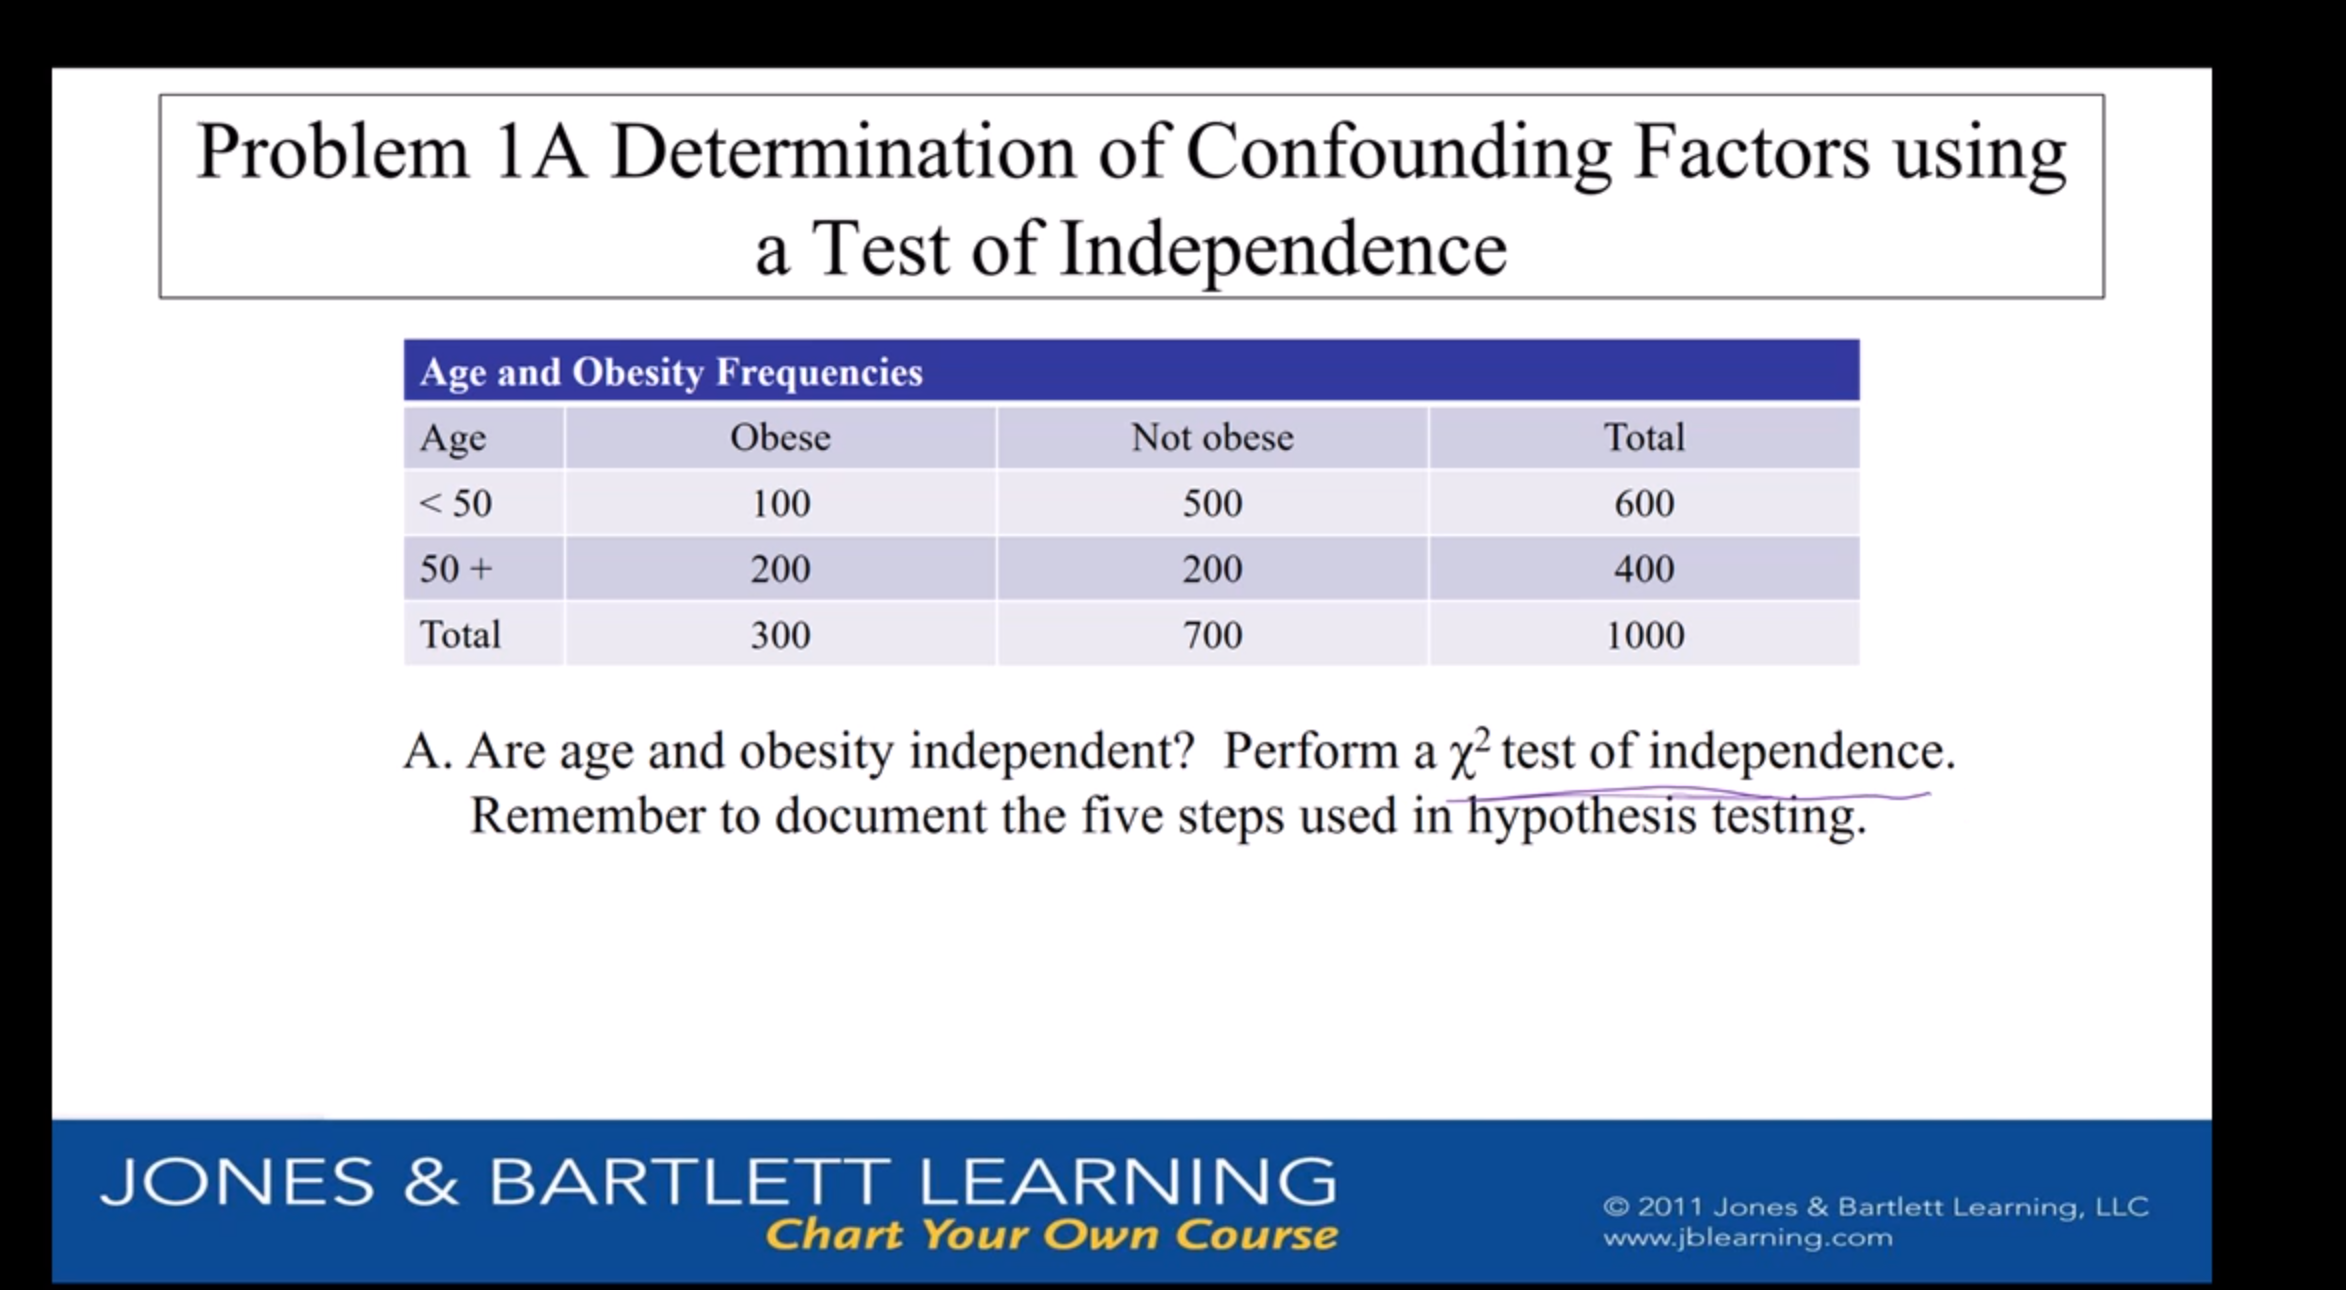 Problem 1A Determination of Confounding Factors using
a Test of Independence
Age and Obesity Frequencies
Obese
Not obese
Total
Age
500
100
600
<50
50+
200
200
400
Total
1000
300
700
A. Are age and obesity independent? Perform a y2 test of independence.
Remember to document the five steps used in hypothesis testing.
JONES& BARTLETT LEARNING
Chart Your Own Course
O2011 Jones & Bartlett Learning, LLC
www.jblearning.com
